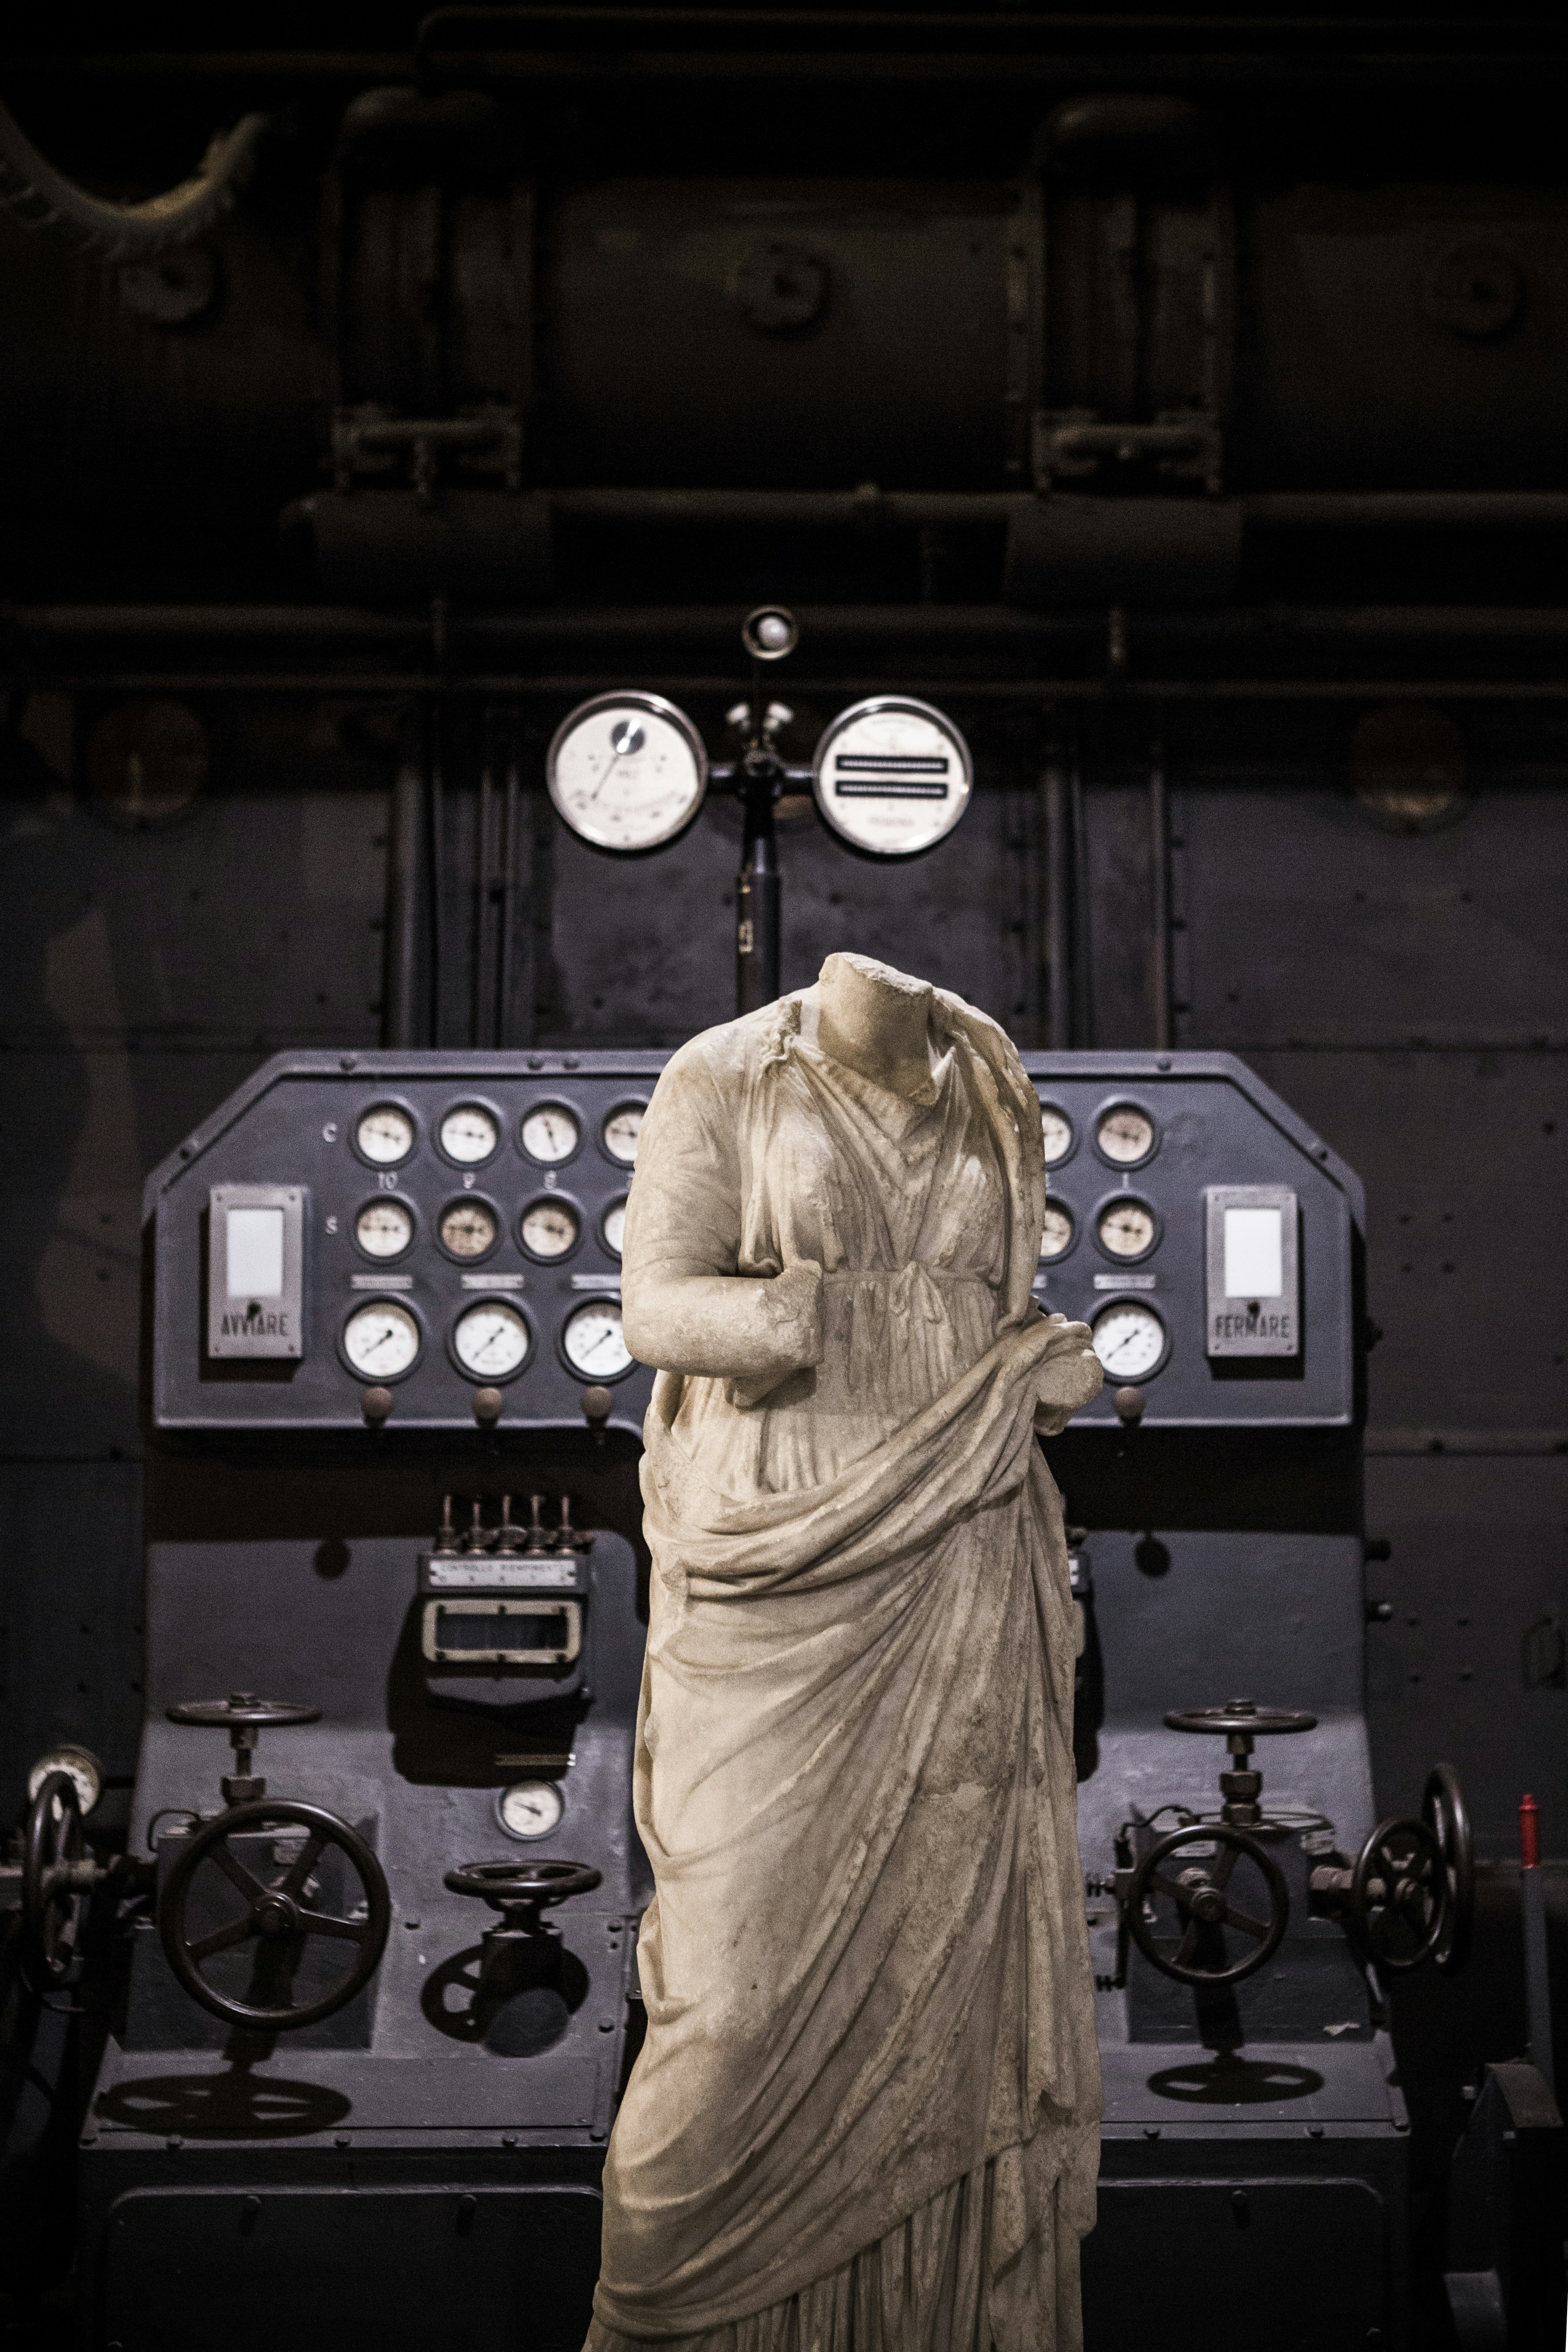 A white, headless, marble statue stands in front of an old black control station that has many dials and gauges.